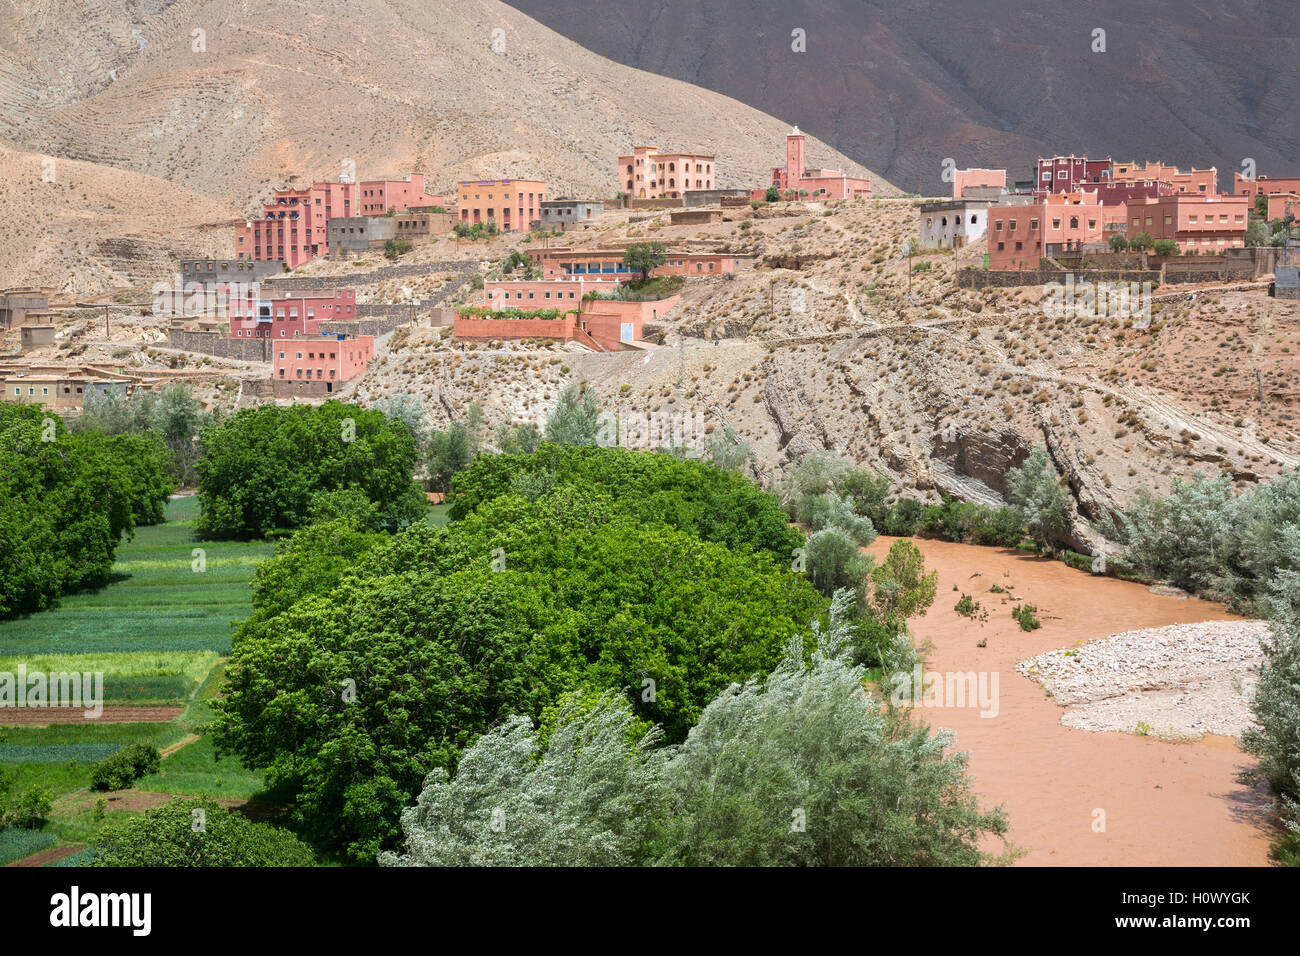 Dades Gorge, Morocco.  Small Town with Farmers' Fields, Muddy Water from Upstream Rains. Stock Photo